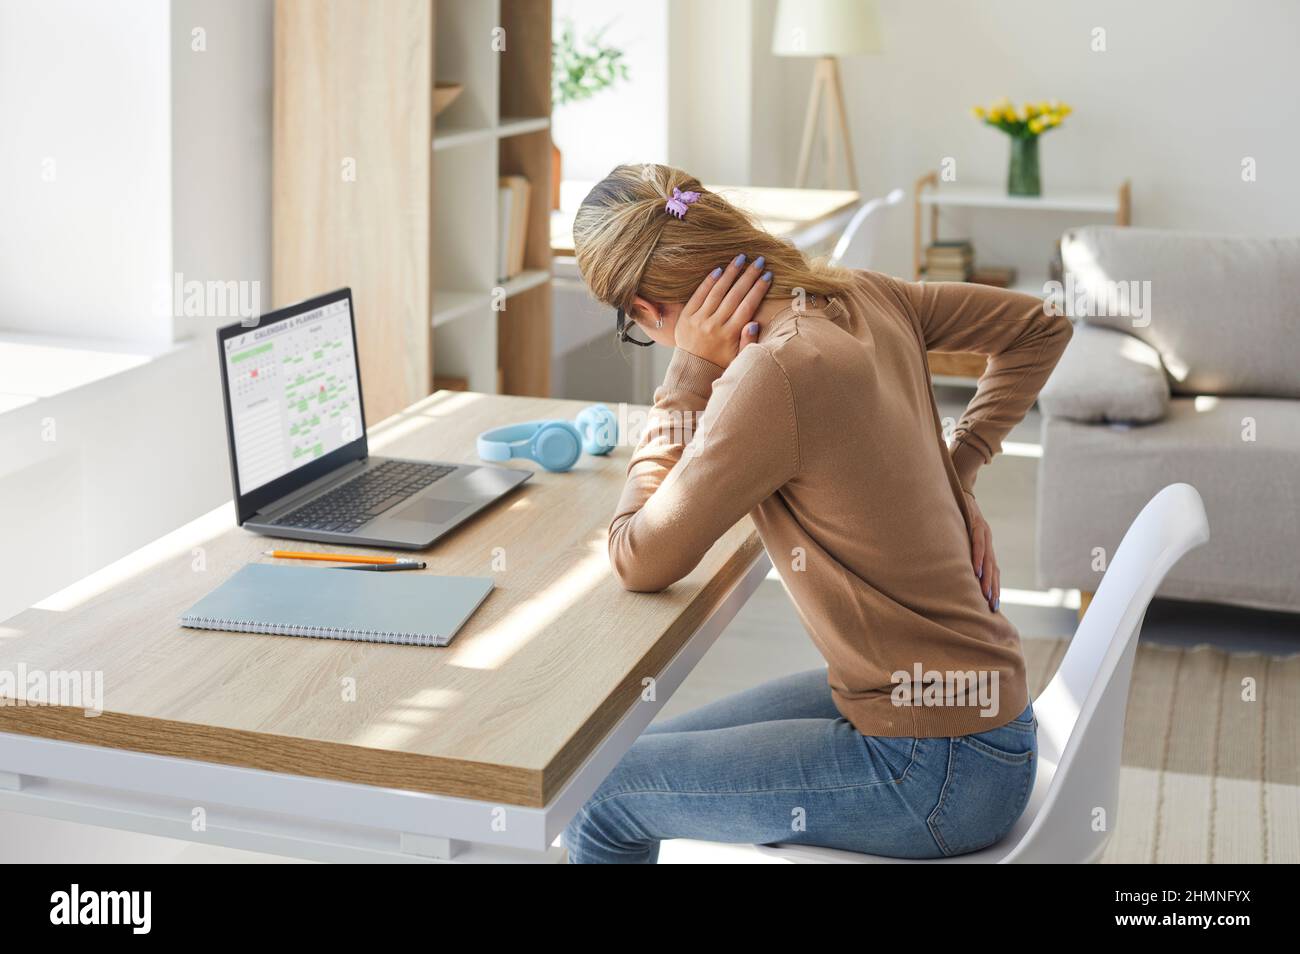 Woman who works in sitting posture on her laptop computer is suffering from back pain Stock Photo